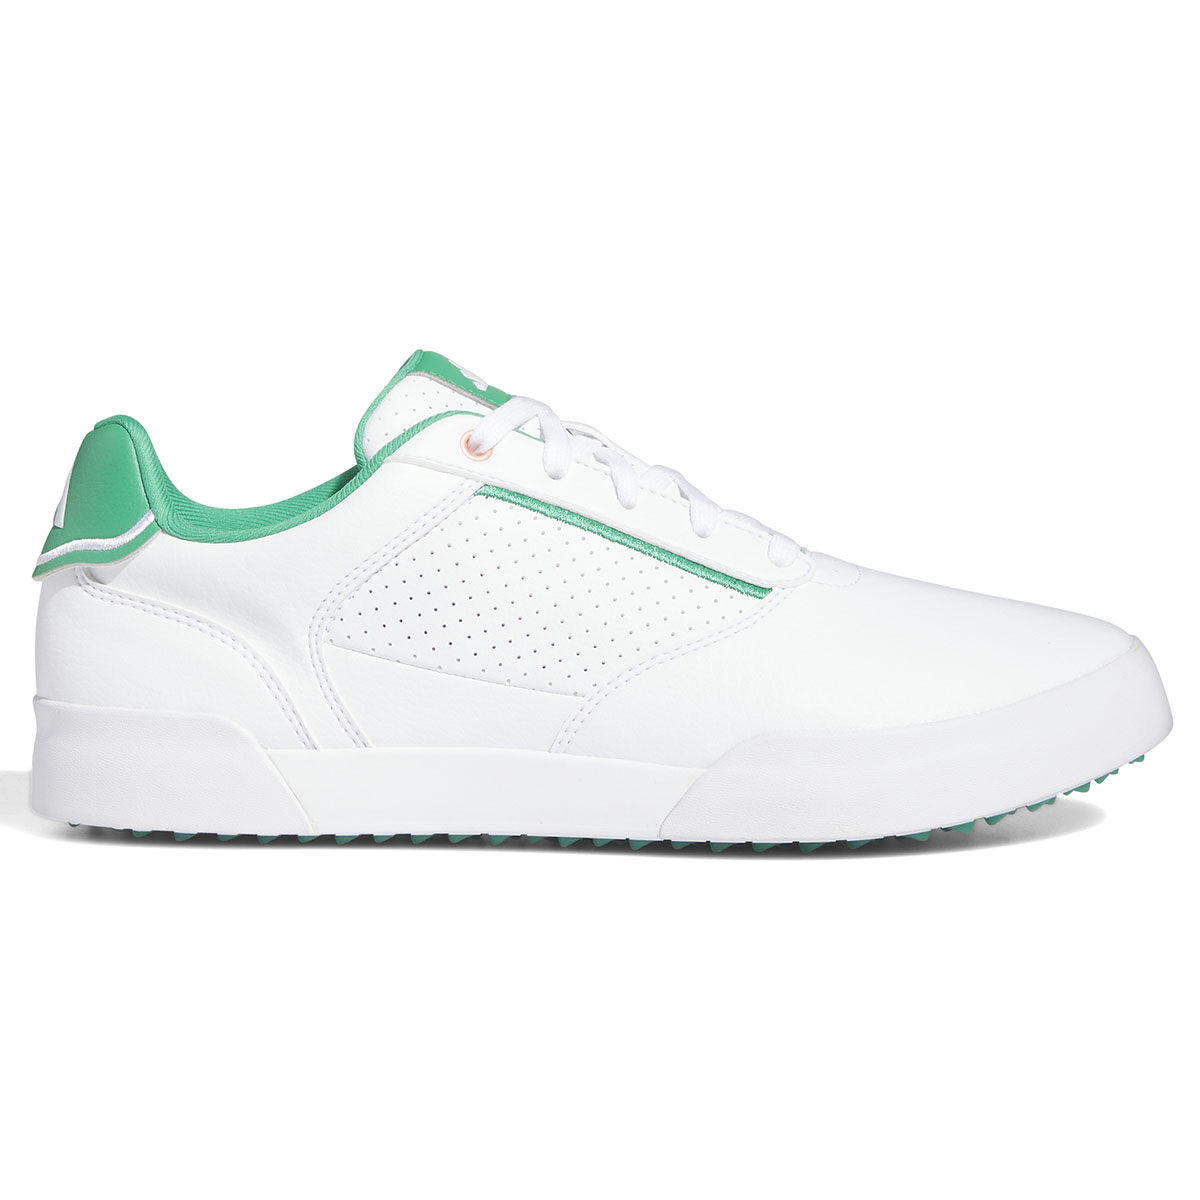 adidas Golf Men’s White and Green Retrocross Spikeless Golf Shoes, Size: 8 | American Golf